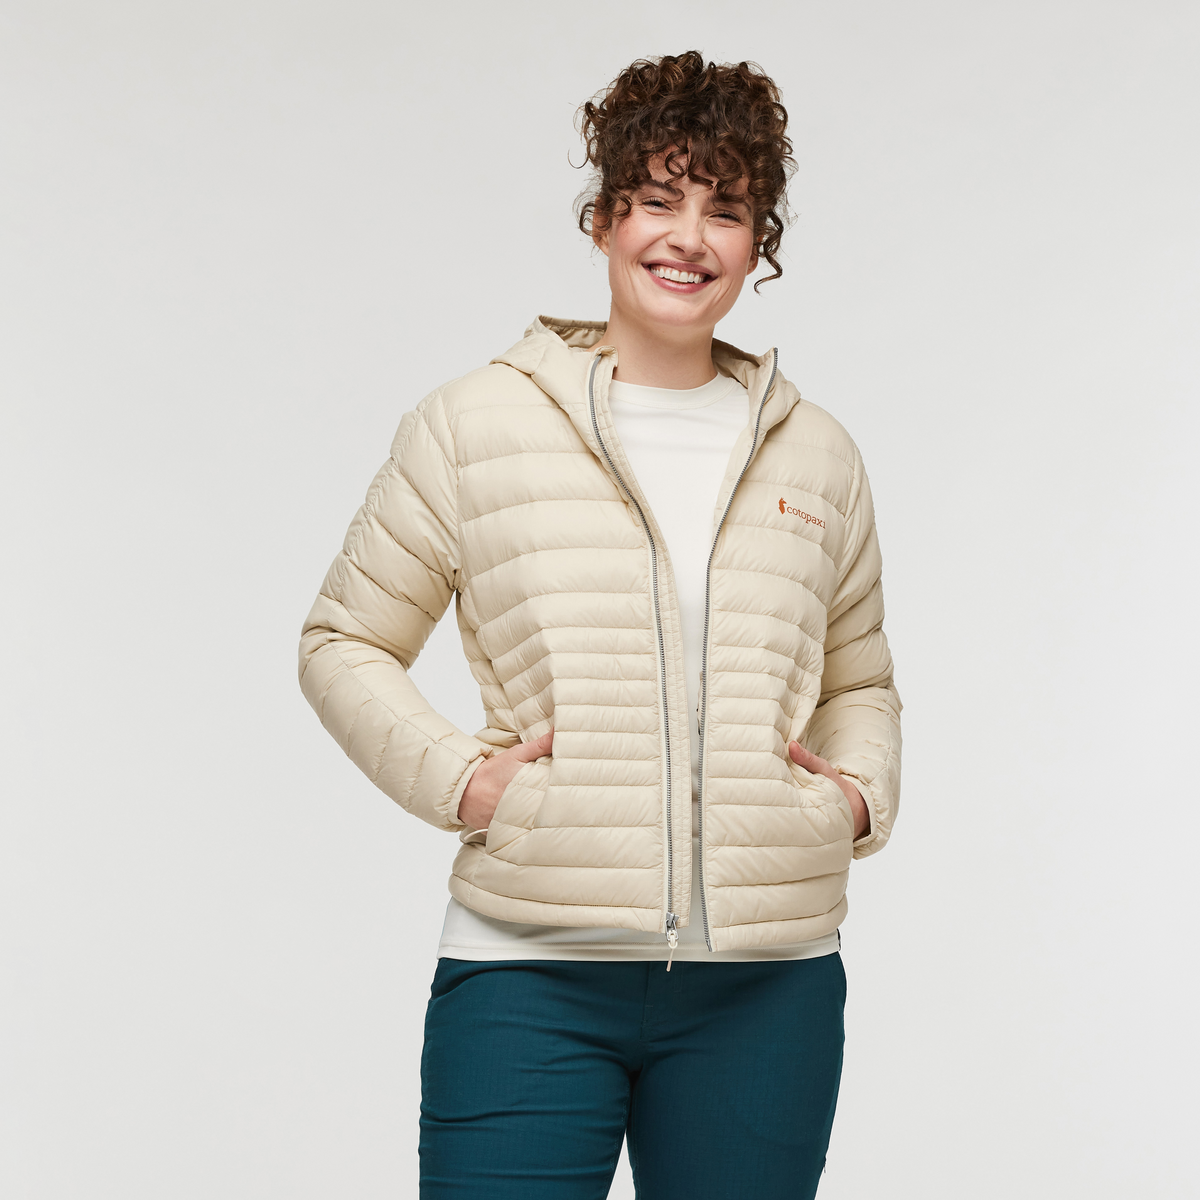 Cotopaxi - Gear For Good  Free shipping on orders $99+